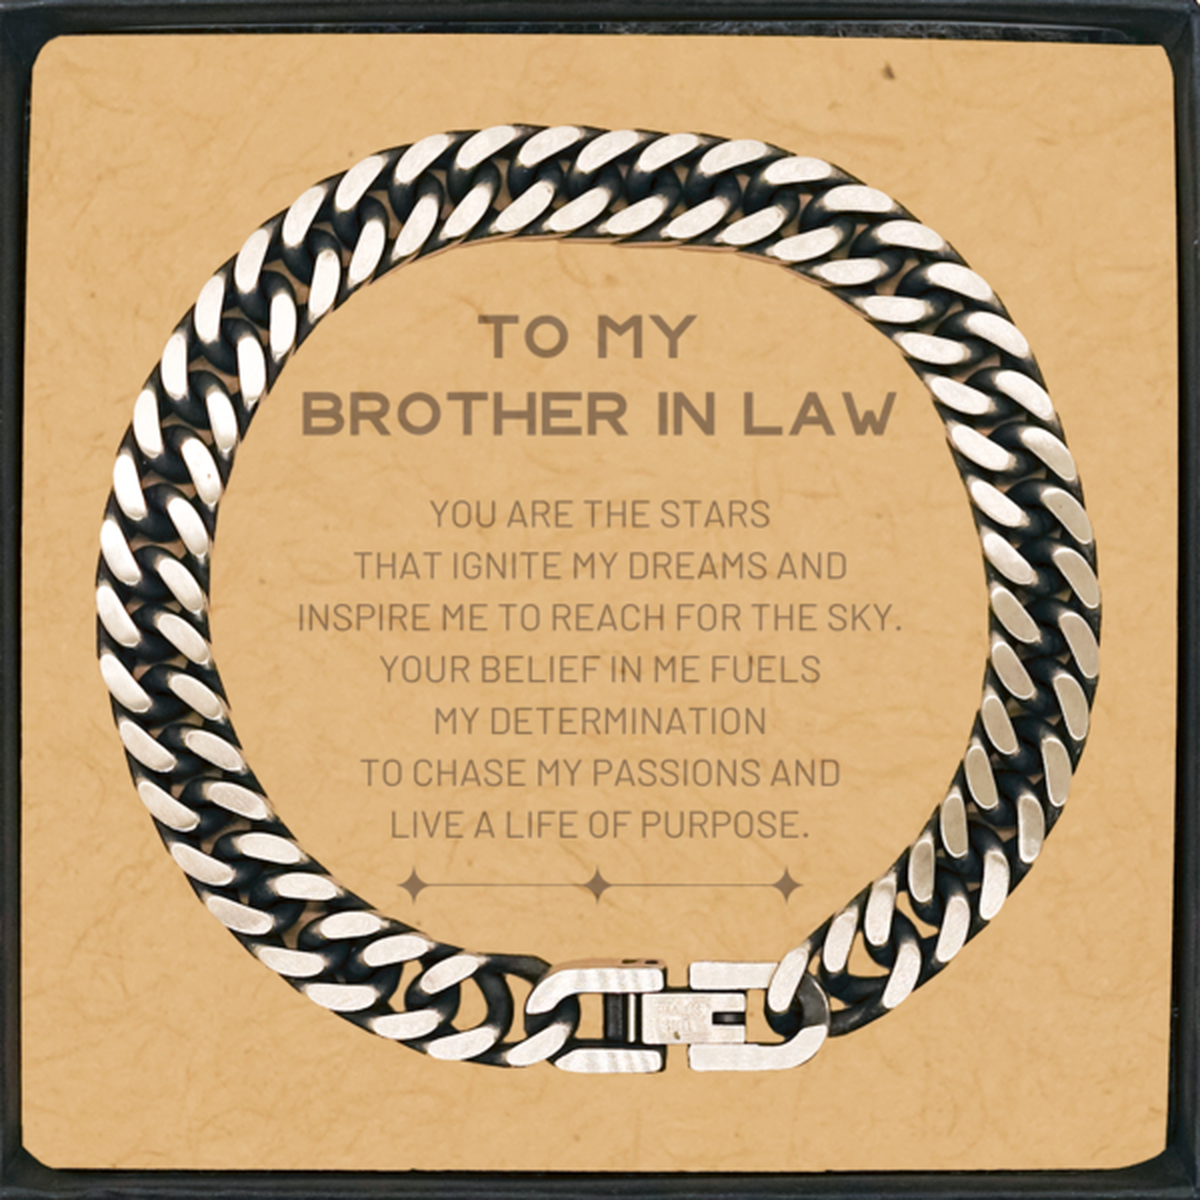 To My Brother In Law Cuban Link Chain Bracelet, You are the stars that ignite my dreams and inspire me to reach for the sky, Birthday Unique Gifts For Brother In Law, Thank You Gifts For Brother In Law